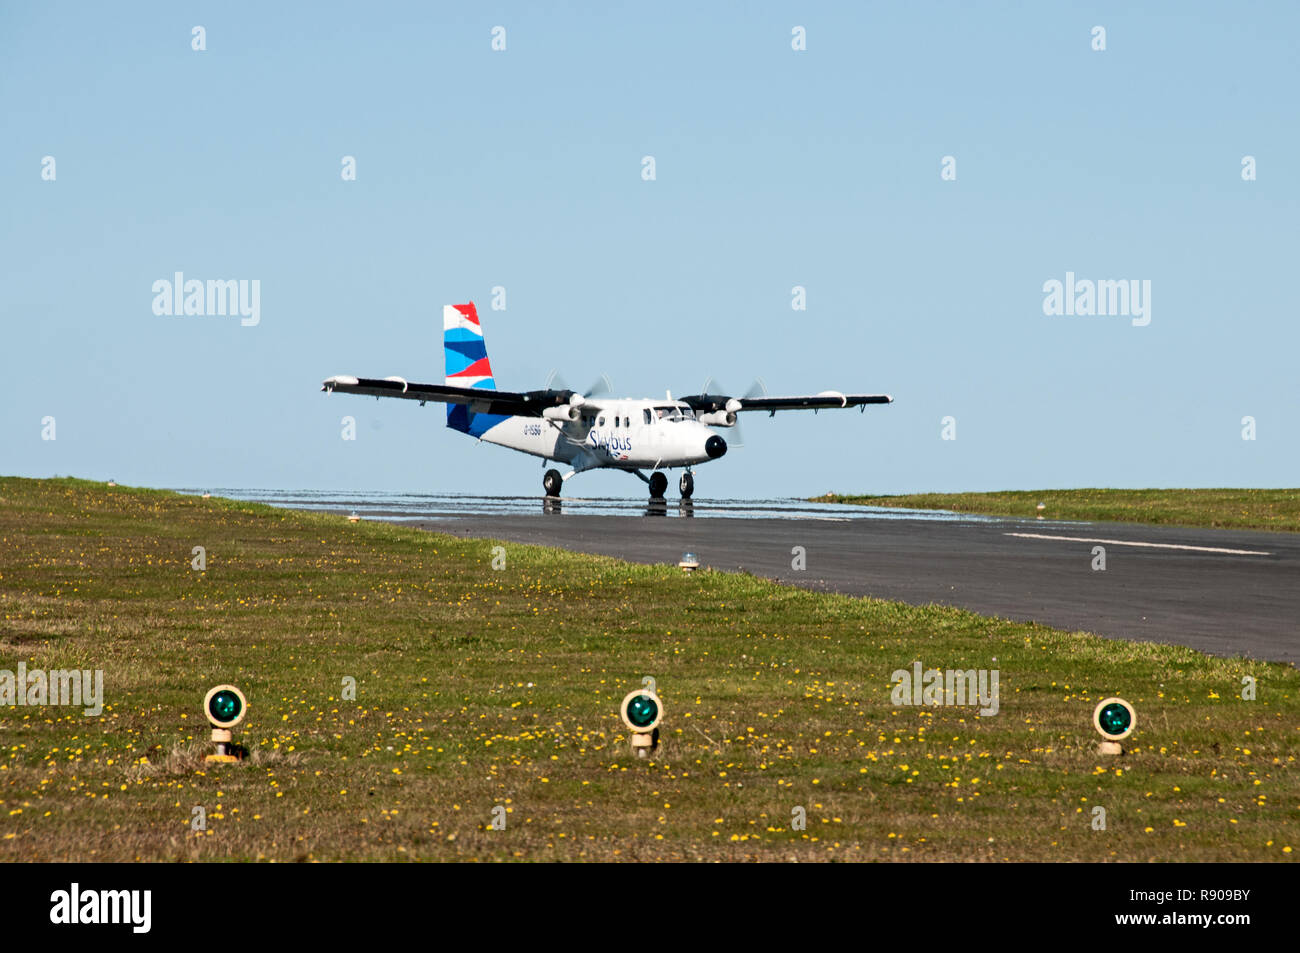 Around the UK - Flying to the Isles of Scilly by Skybus Stock Photo